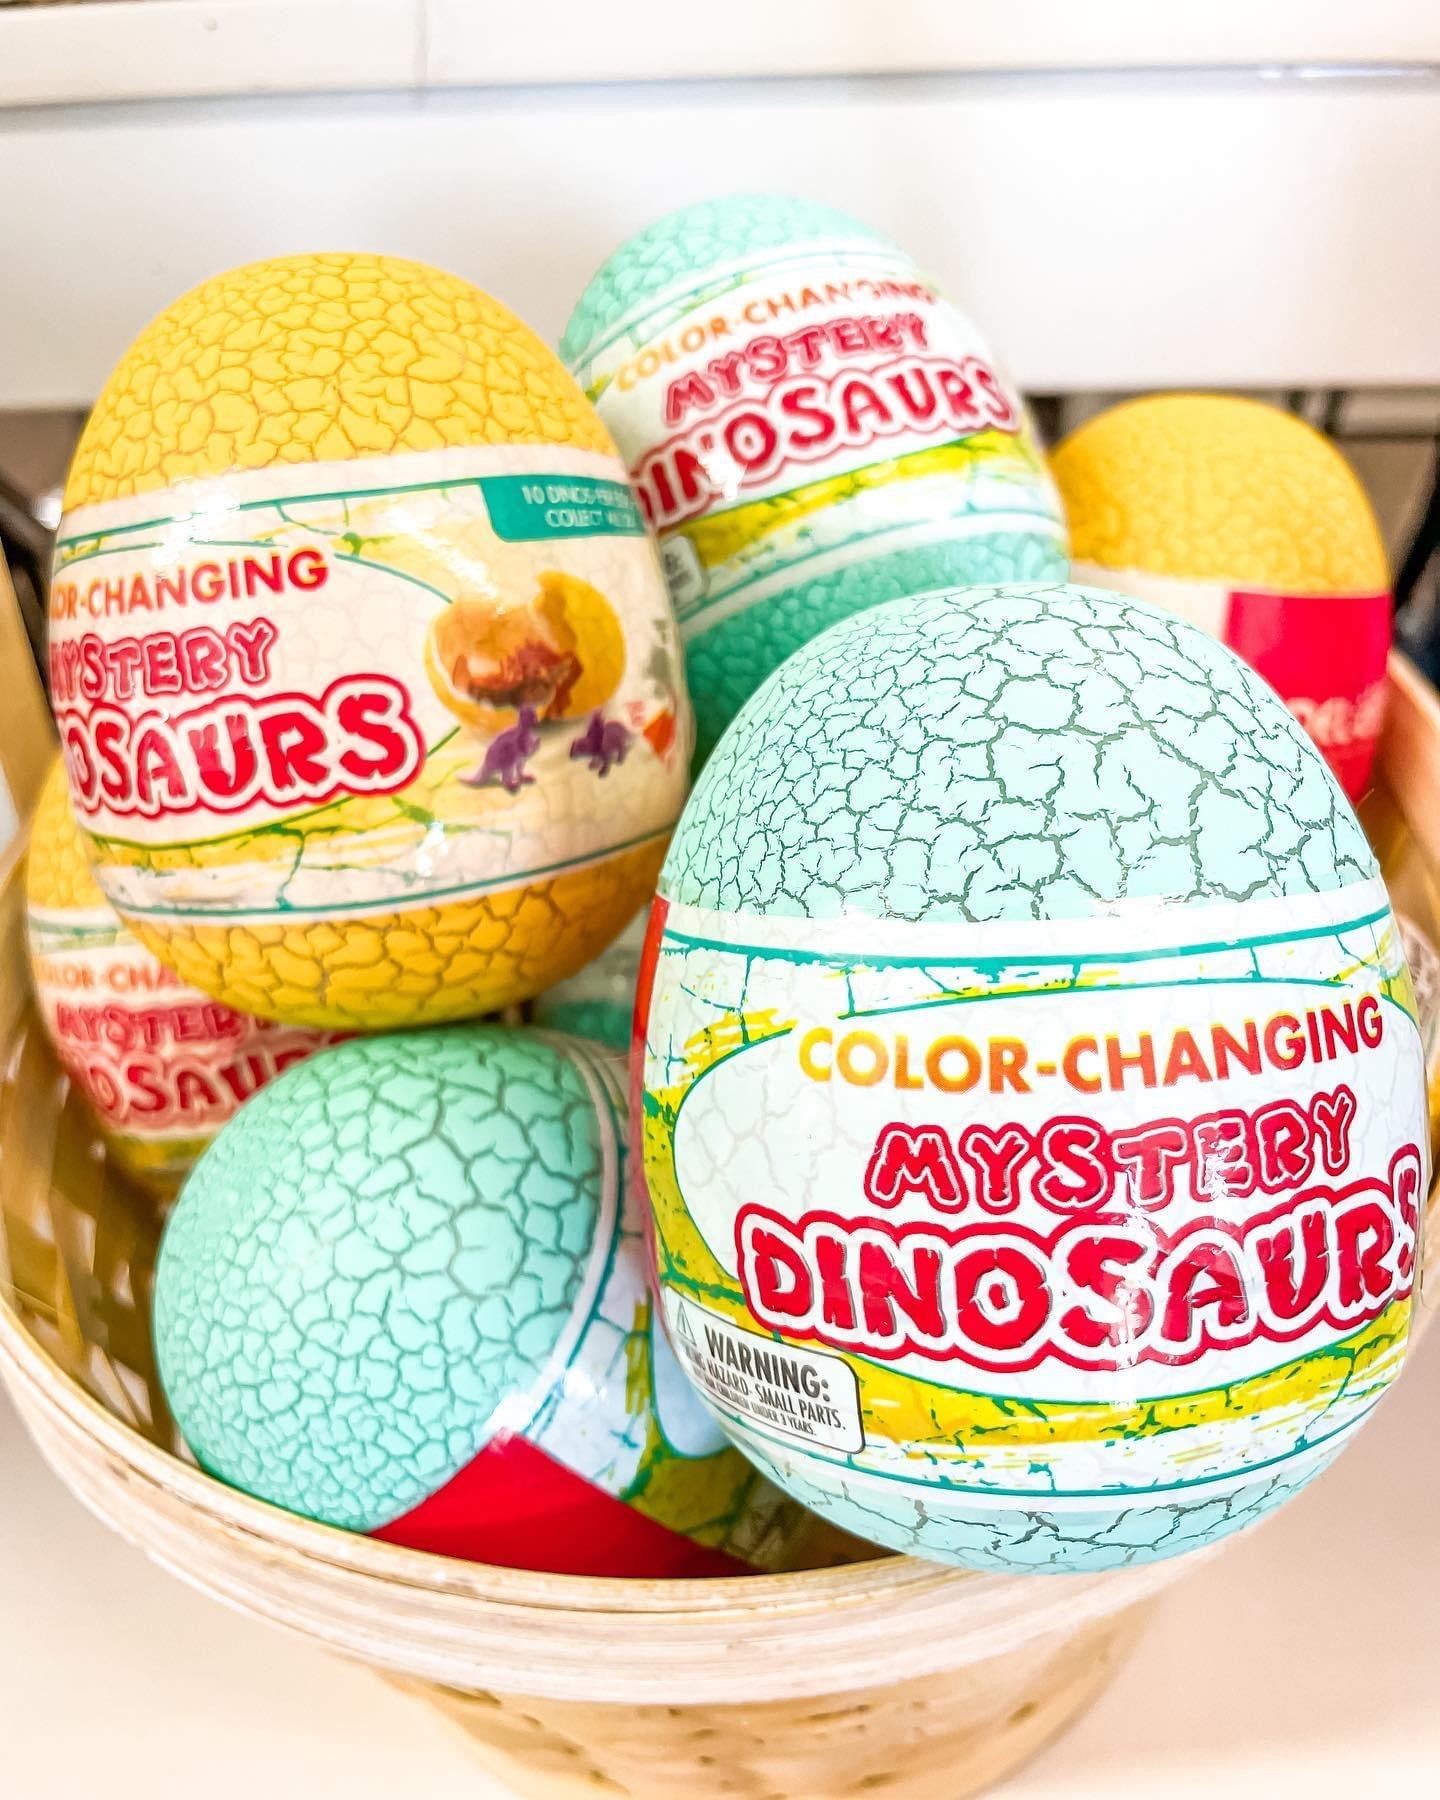 Mystery color-changing dinosaur eggs, yellow and blue.